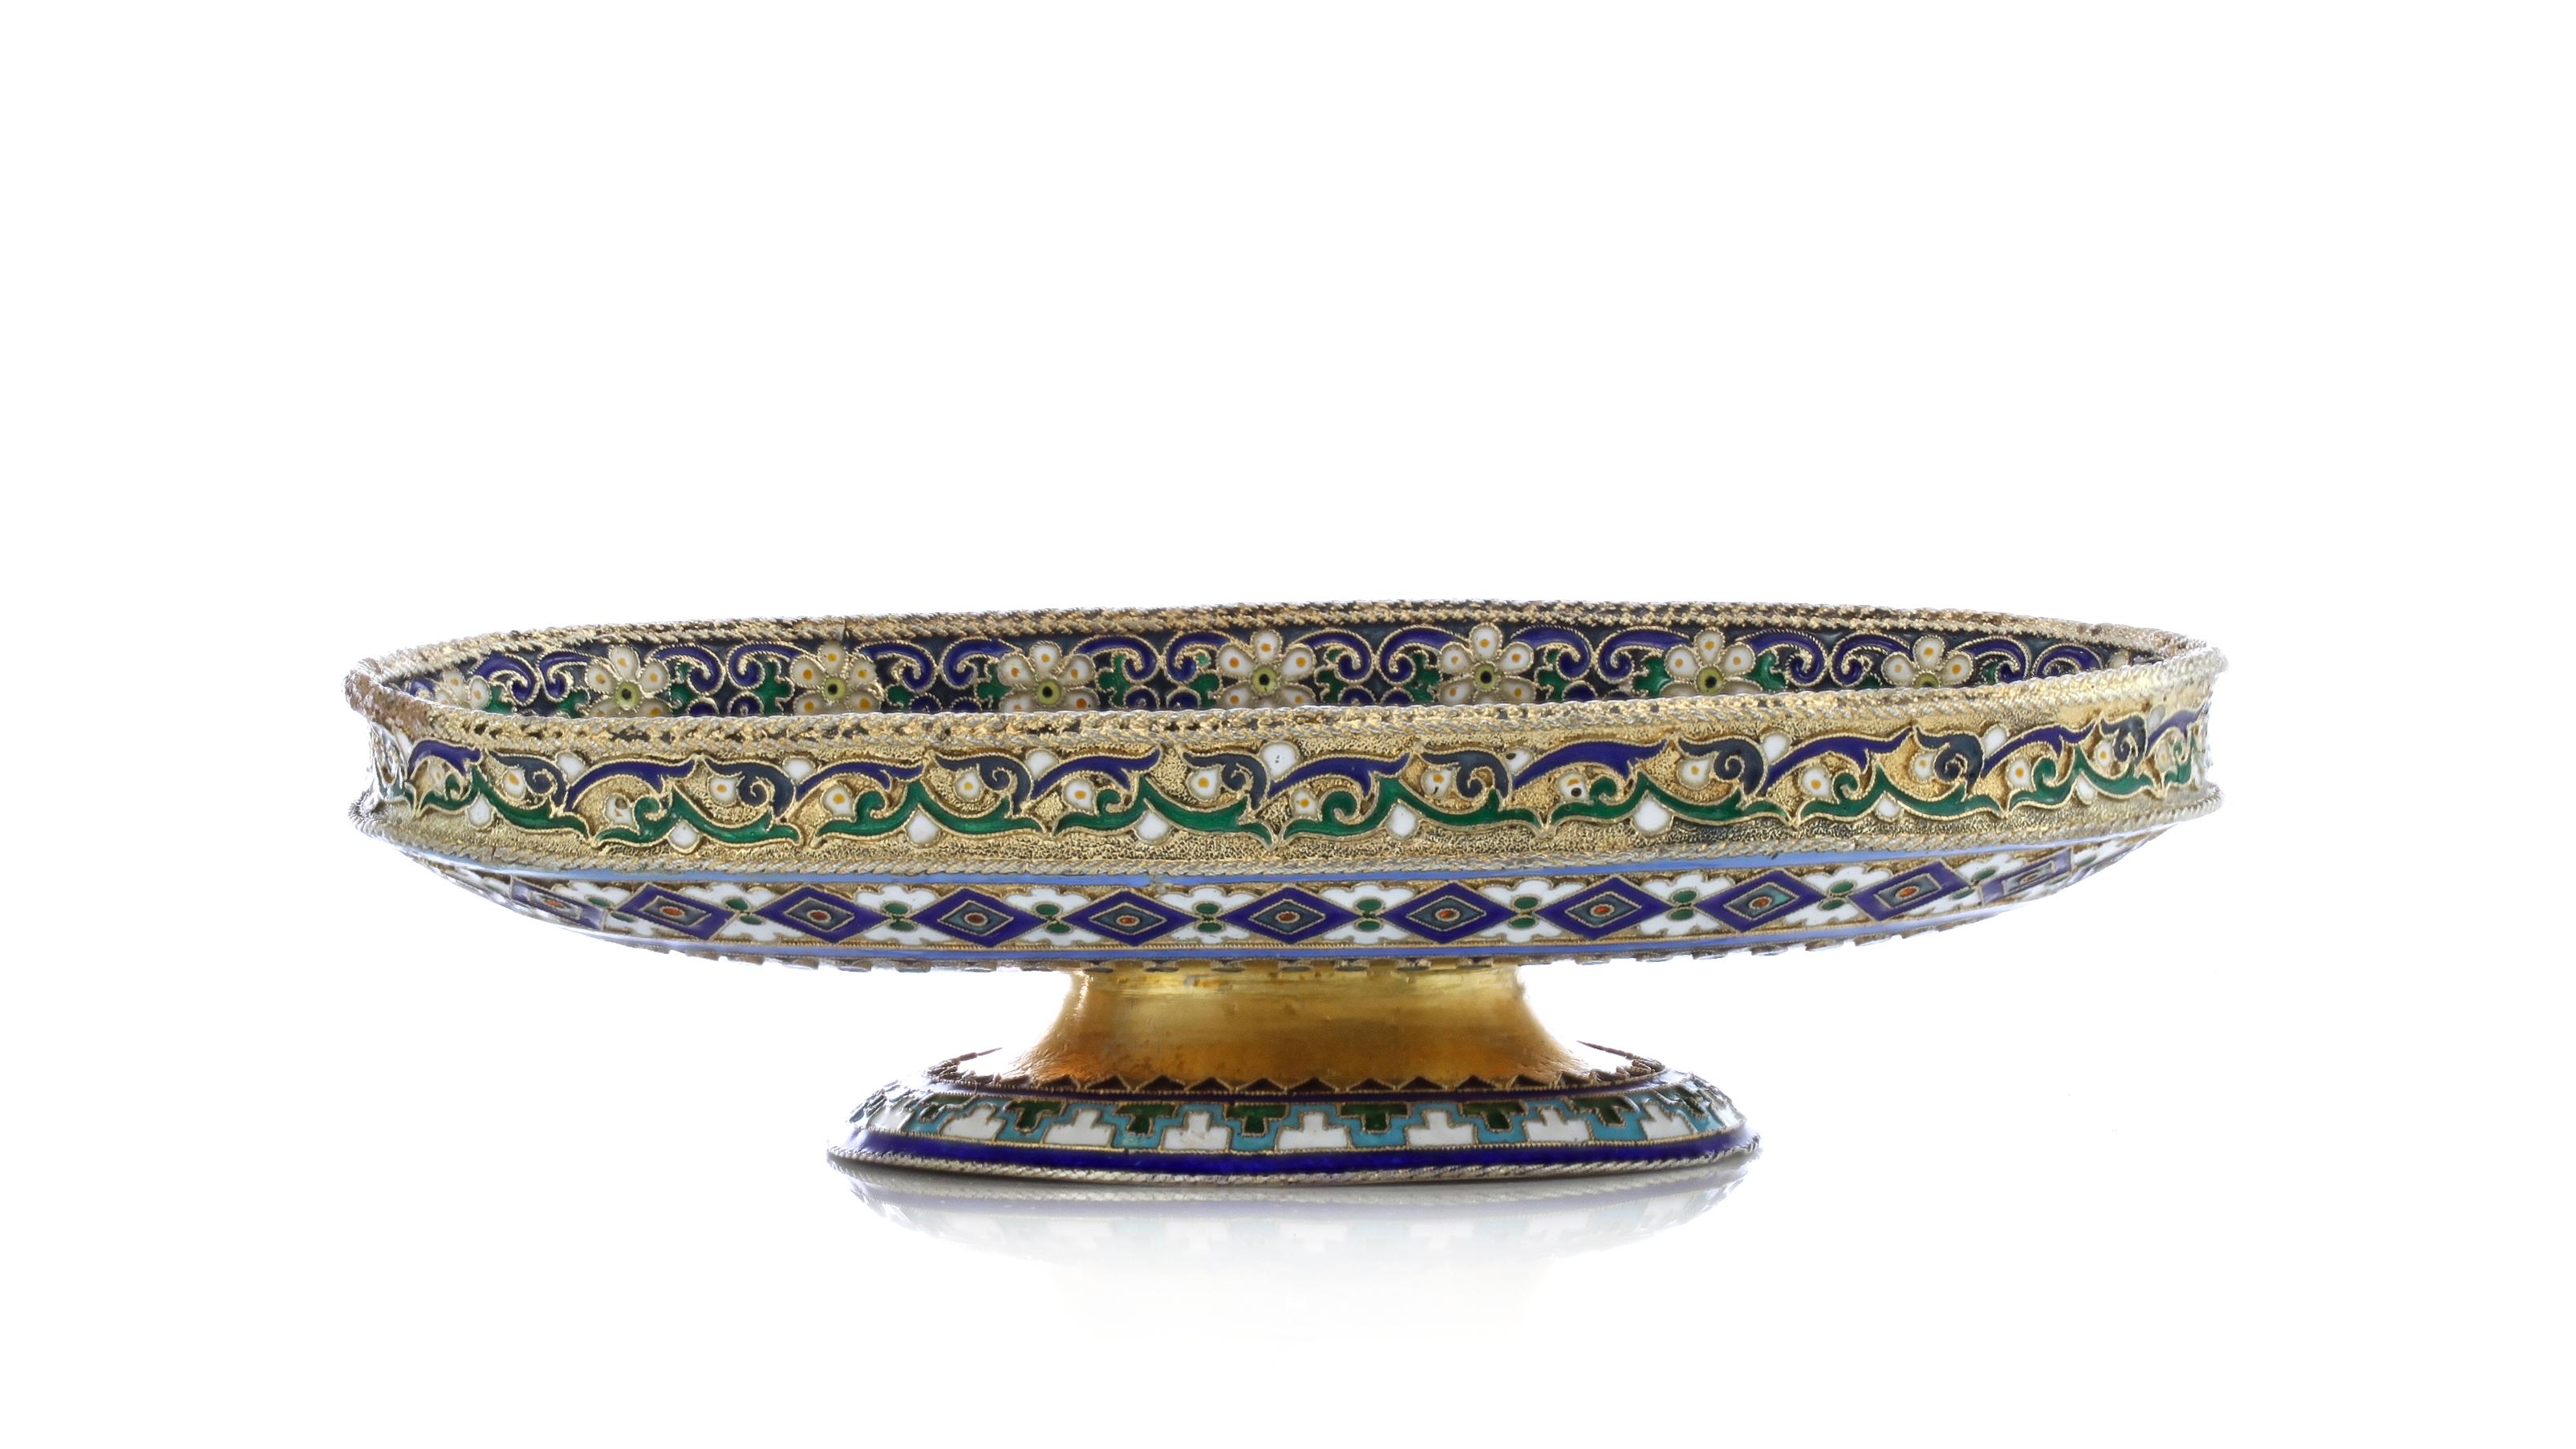 Antique Russian cloisonné enamel silver dish by Ovchinnikov
Made in Russia, 1890s.

Size: 12 x 7 x 3.2cm

Condition: Excellent.